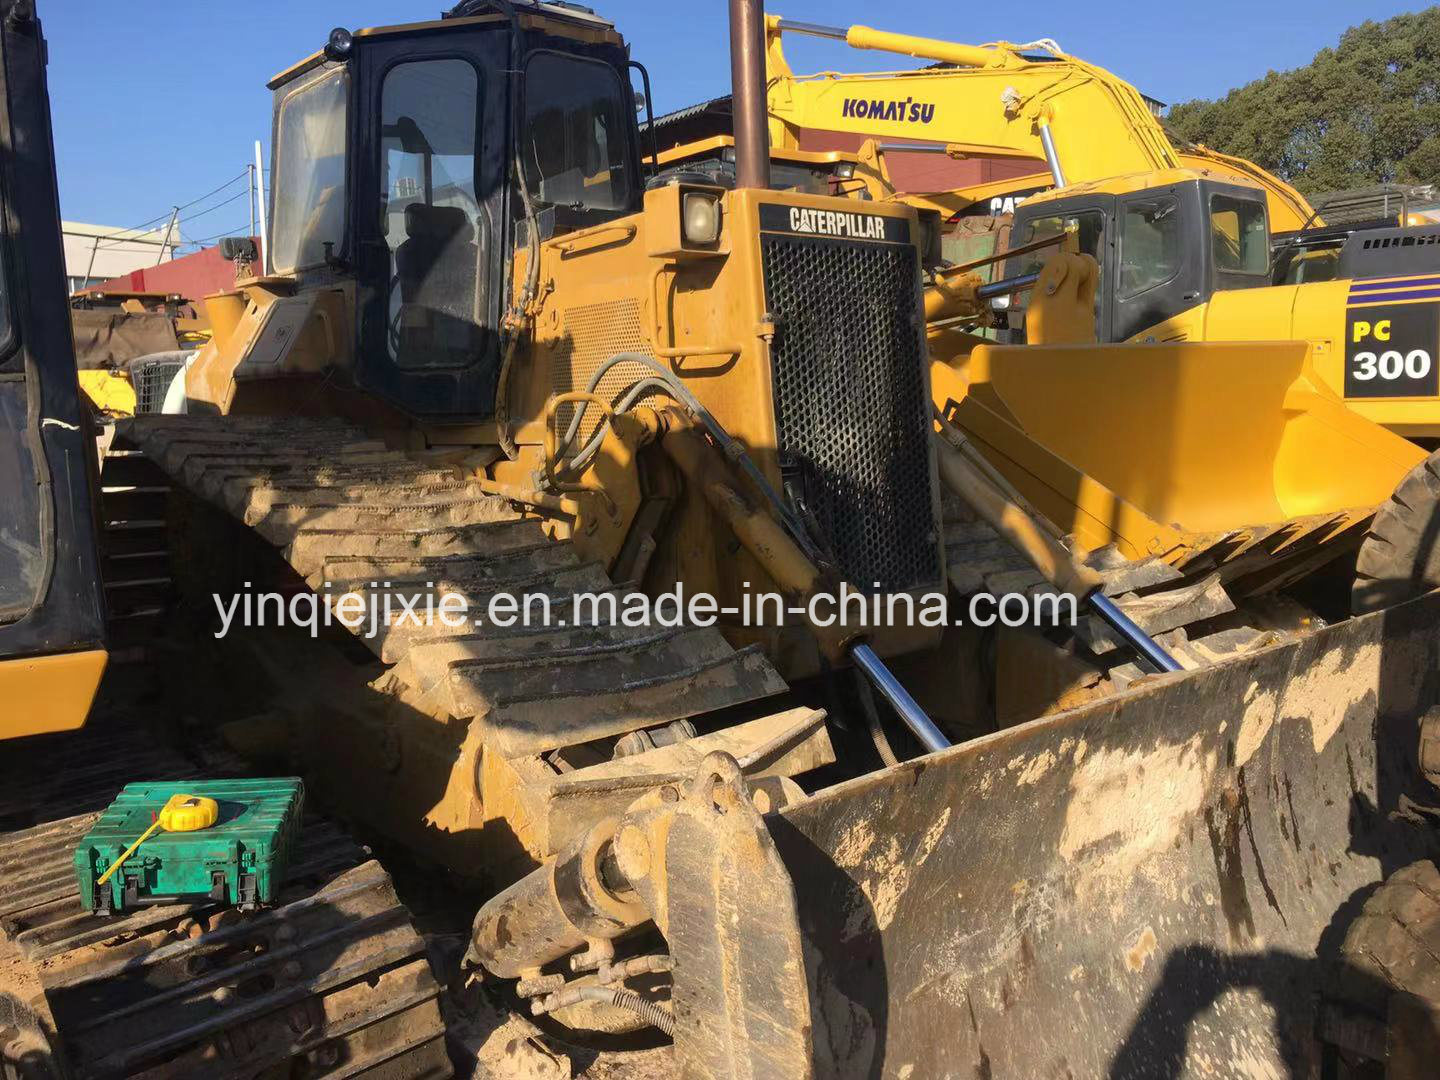 Used Caterpillar D5h Used Bulldozer Cat D5h for Sale